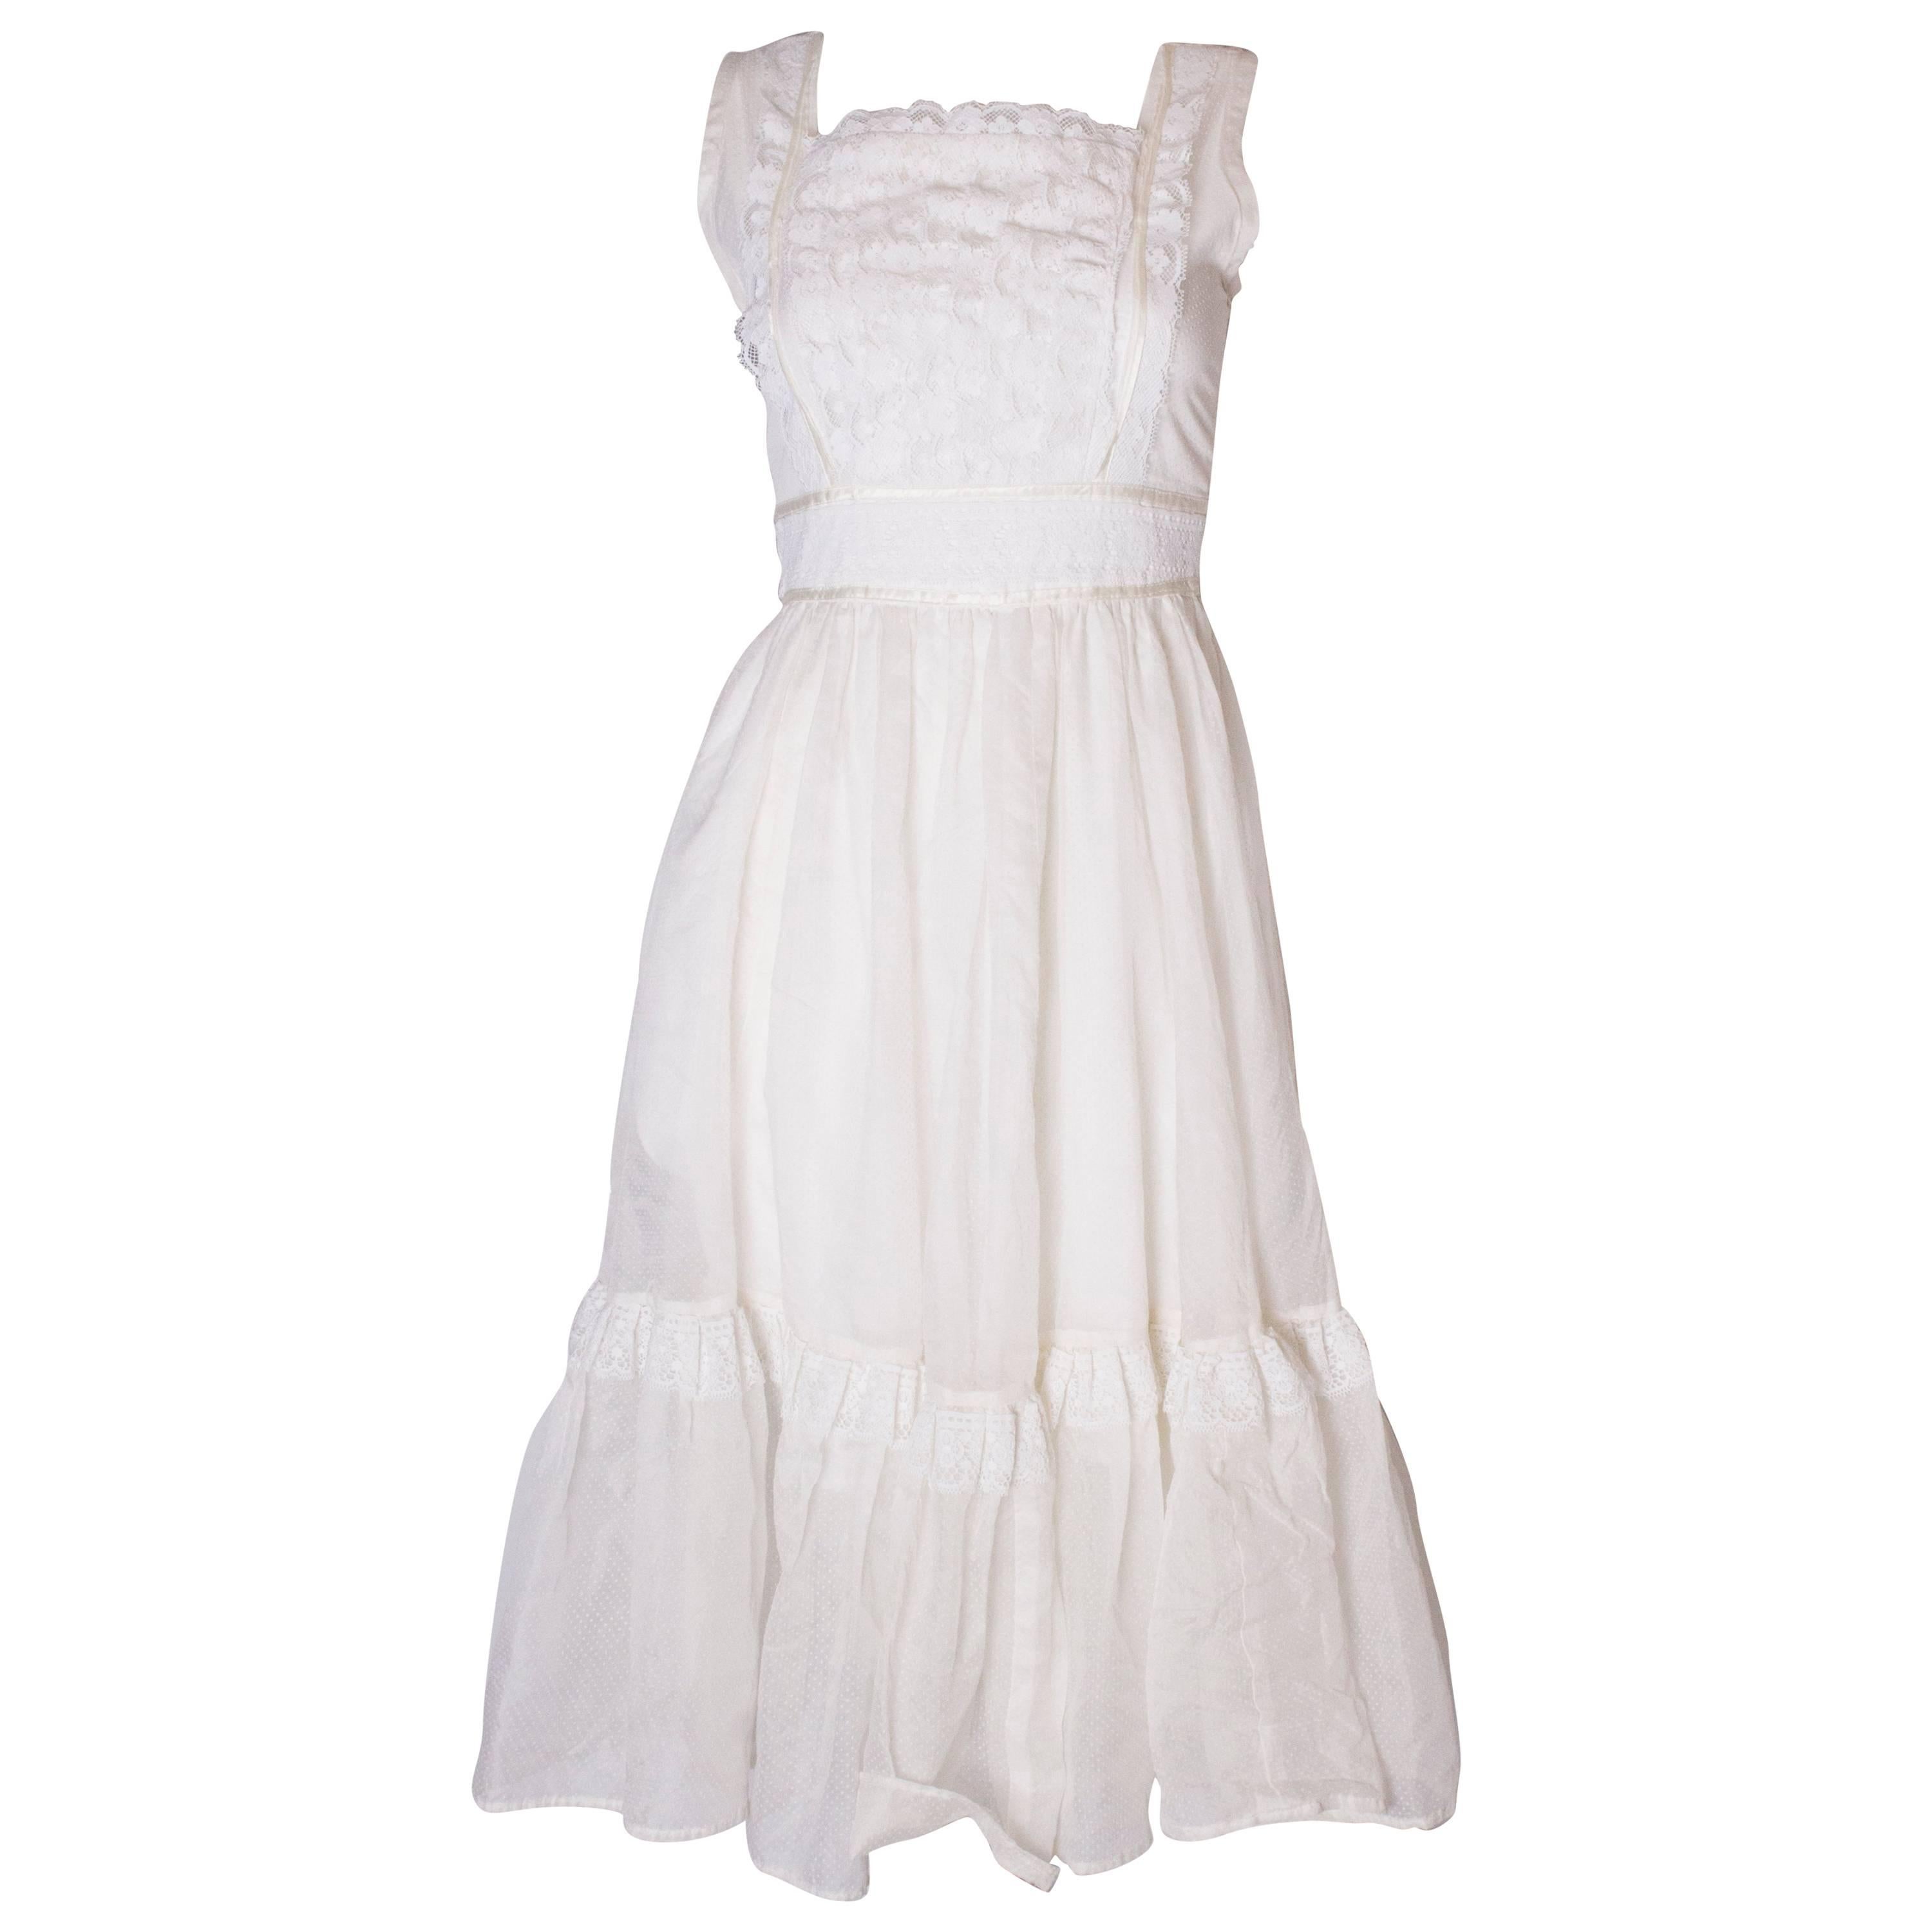 A vintage 1950s White Spotted and Lace summer Dress For Sale at 1stDibs ...